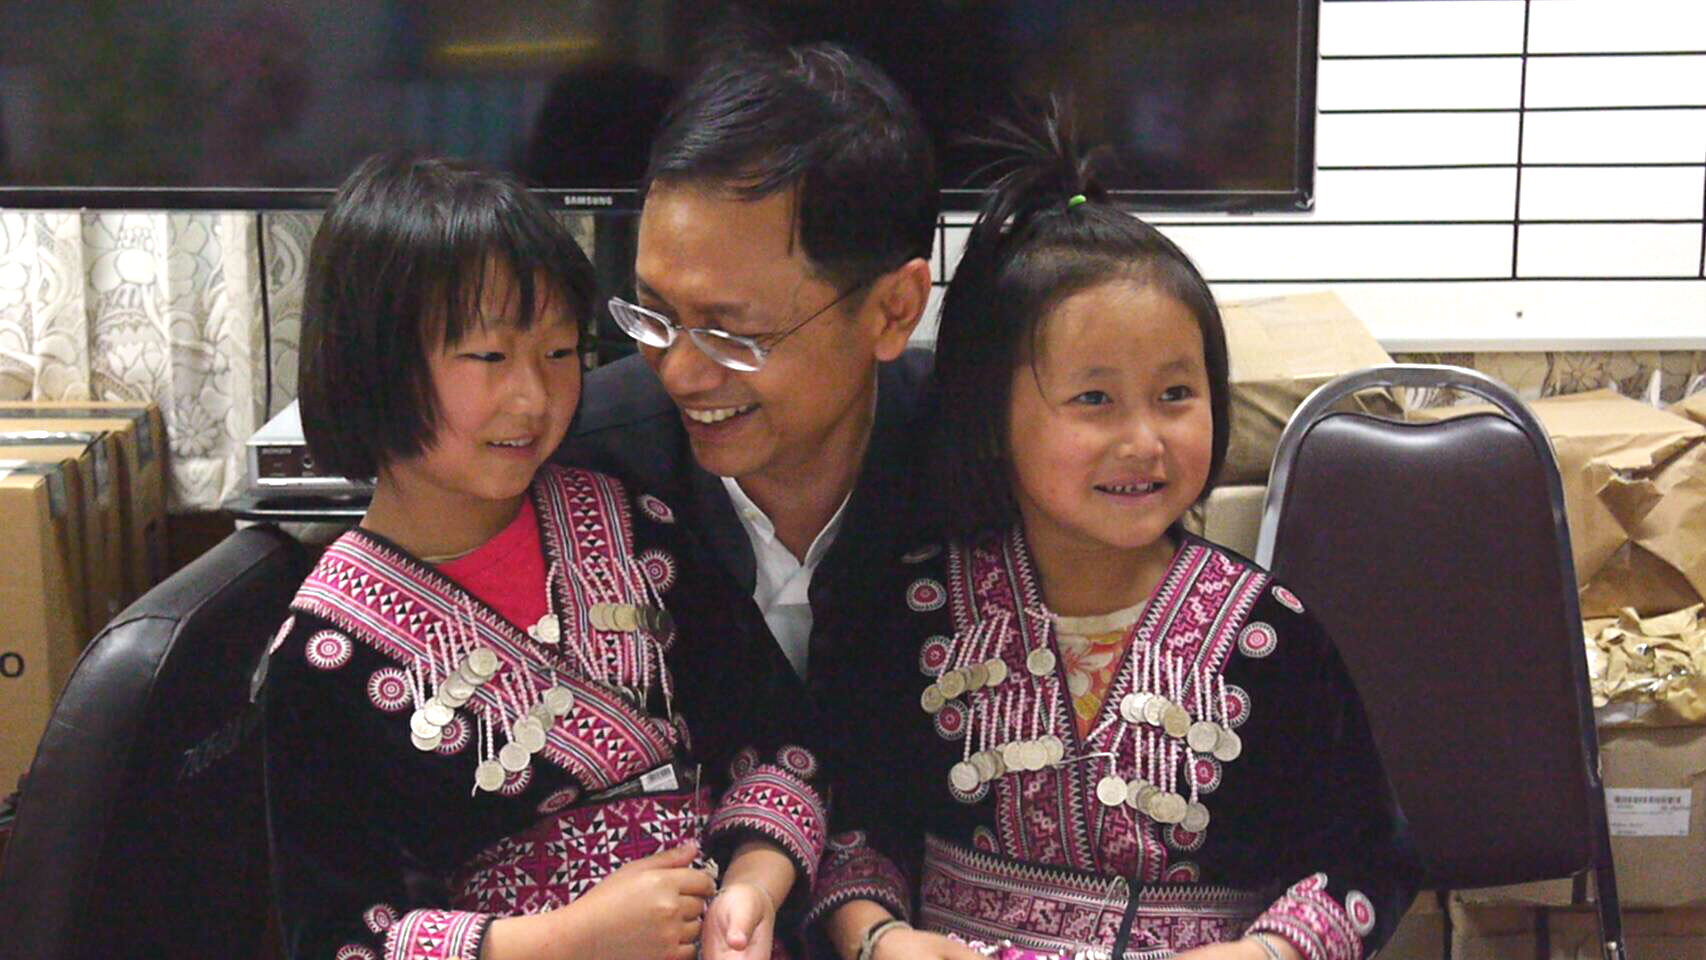 Tuesday at Chiang Mai City Hall, Chiang Mai Gov. Pawin Chamniprasart poses with two young Hmong girls who were branded by British tabloids as thieves at a meeting between their family and British Consulate representatives.